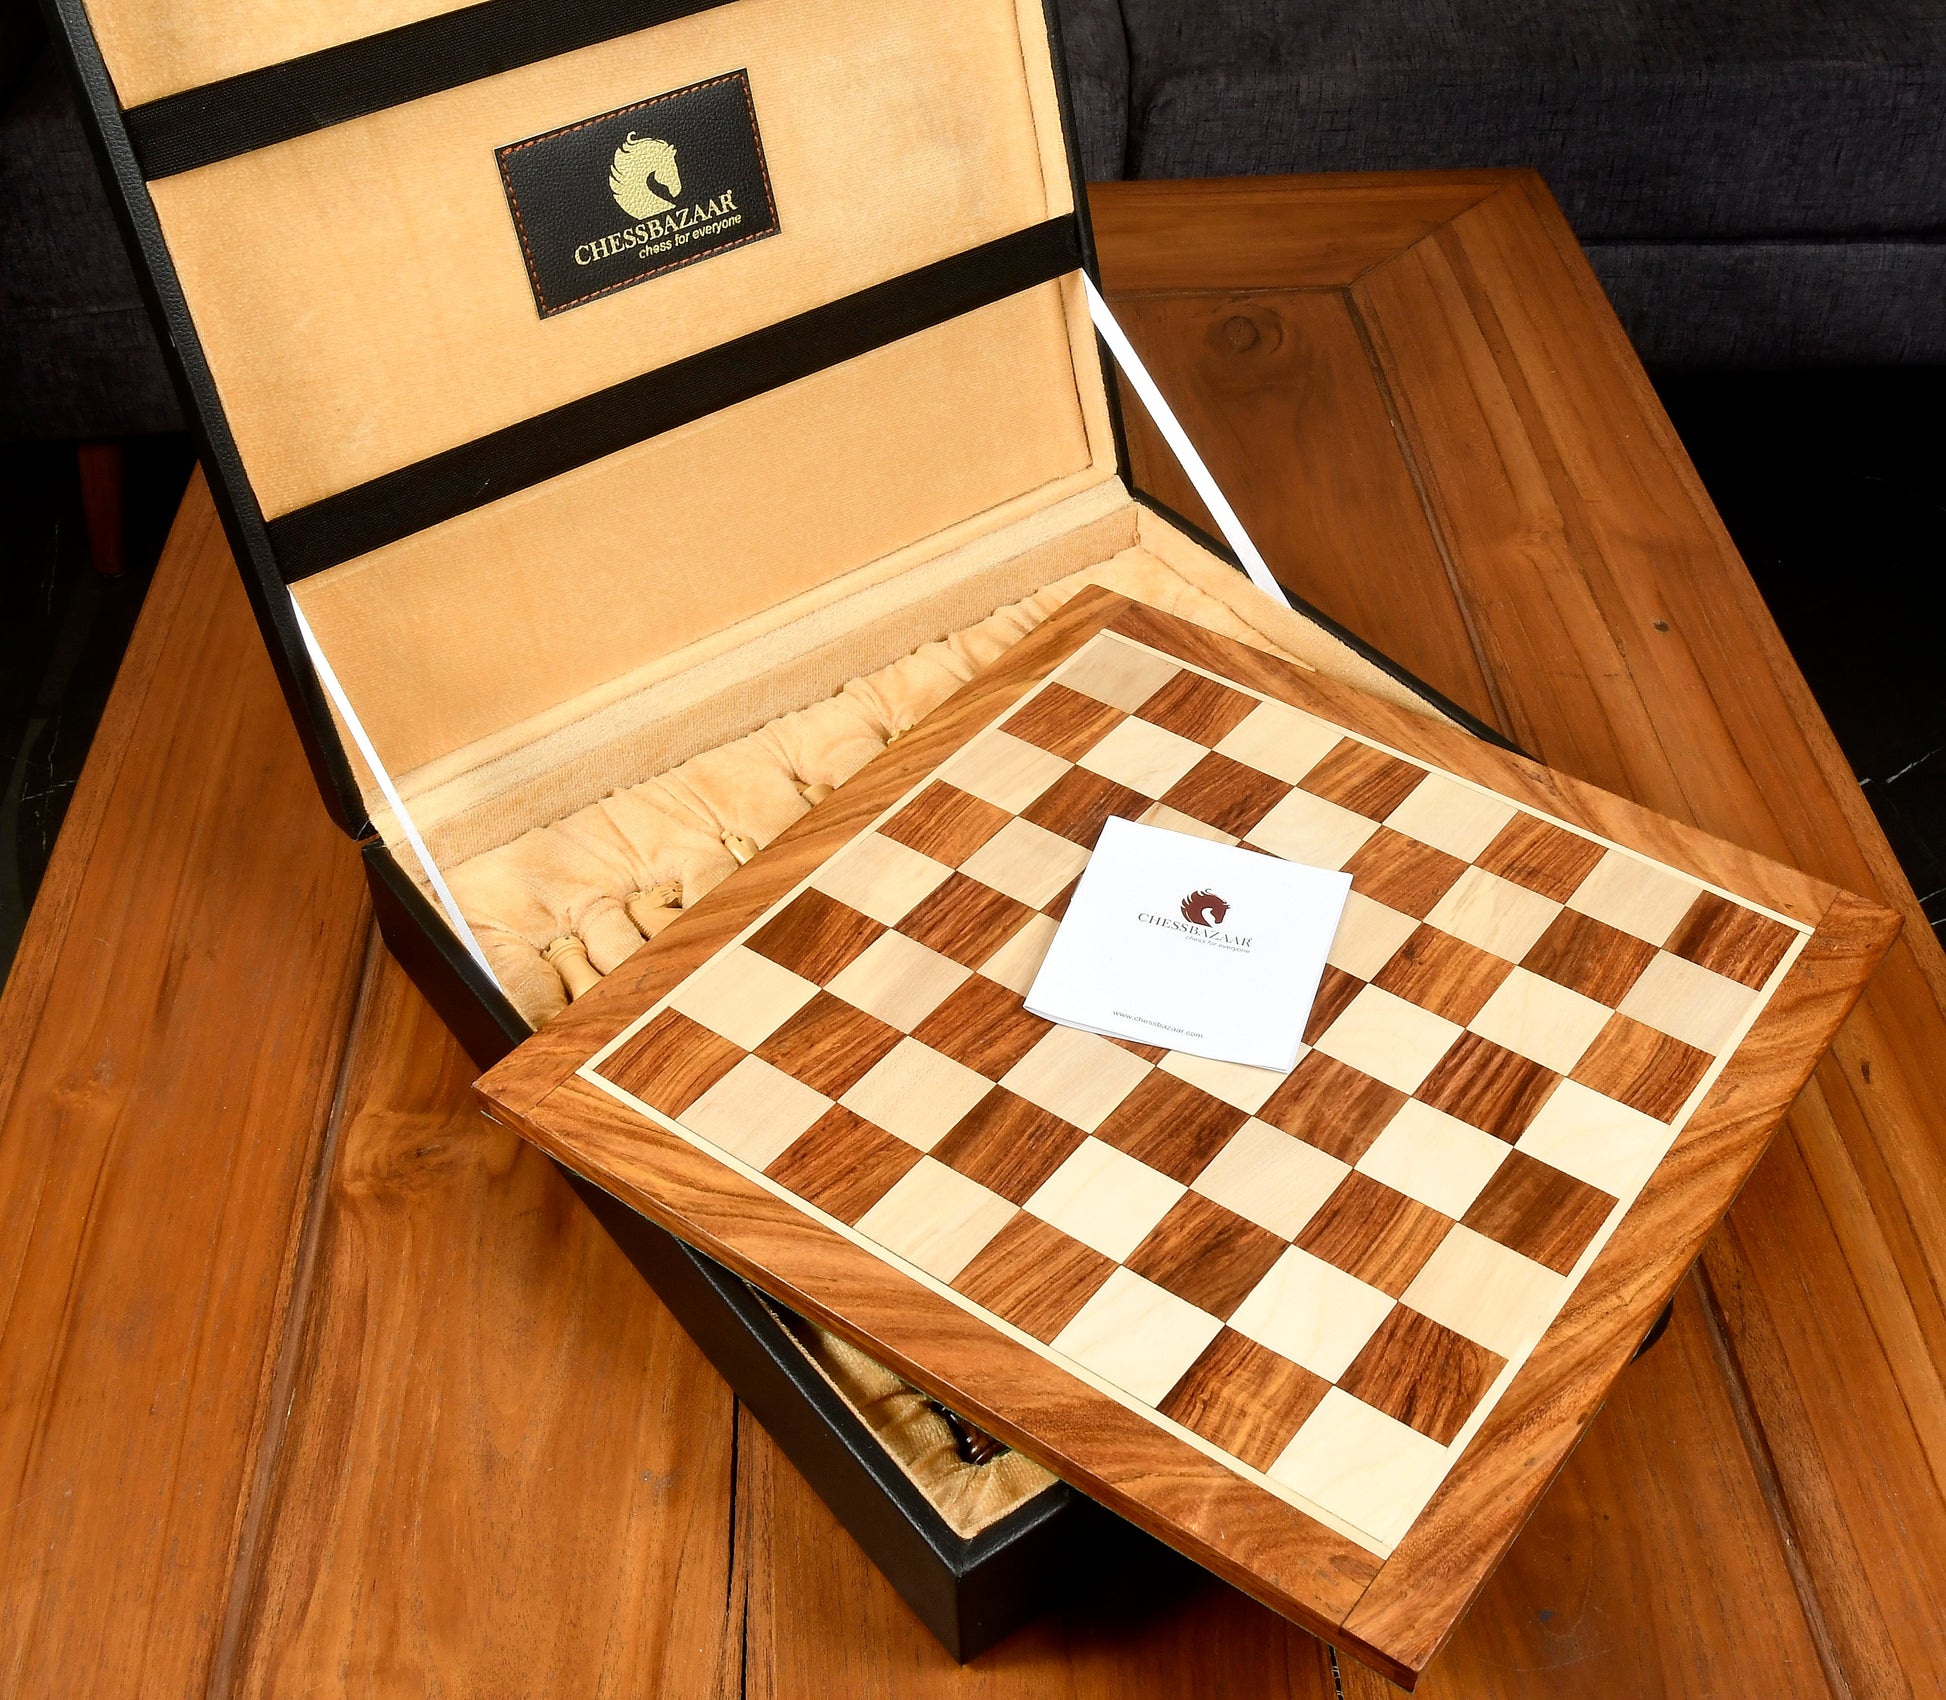 Combo The collector Wooden Staunton Chess Set in Sheesham & Boxwood Pieces, Wooden Chessboard and Coffer Storage Box -2.8" King